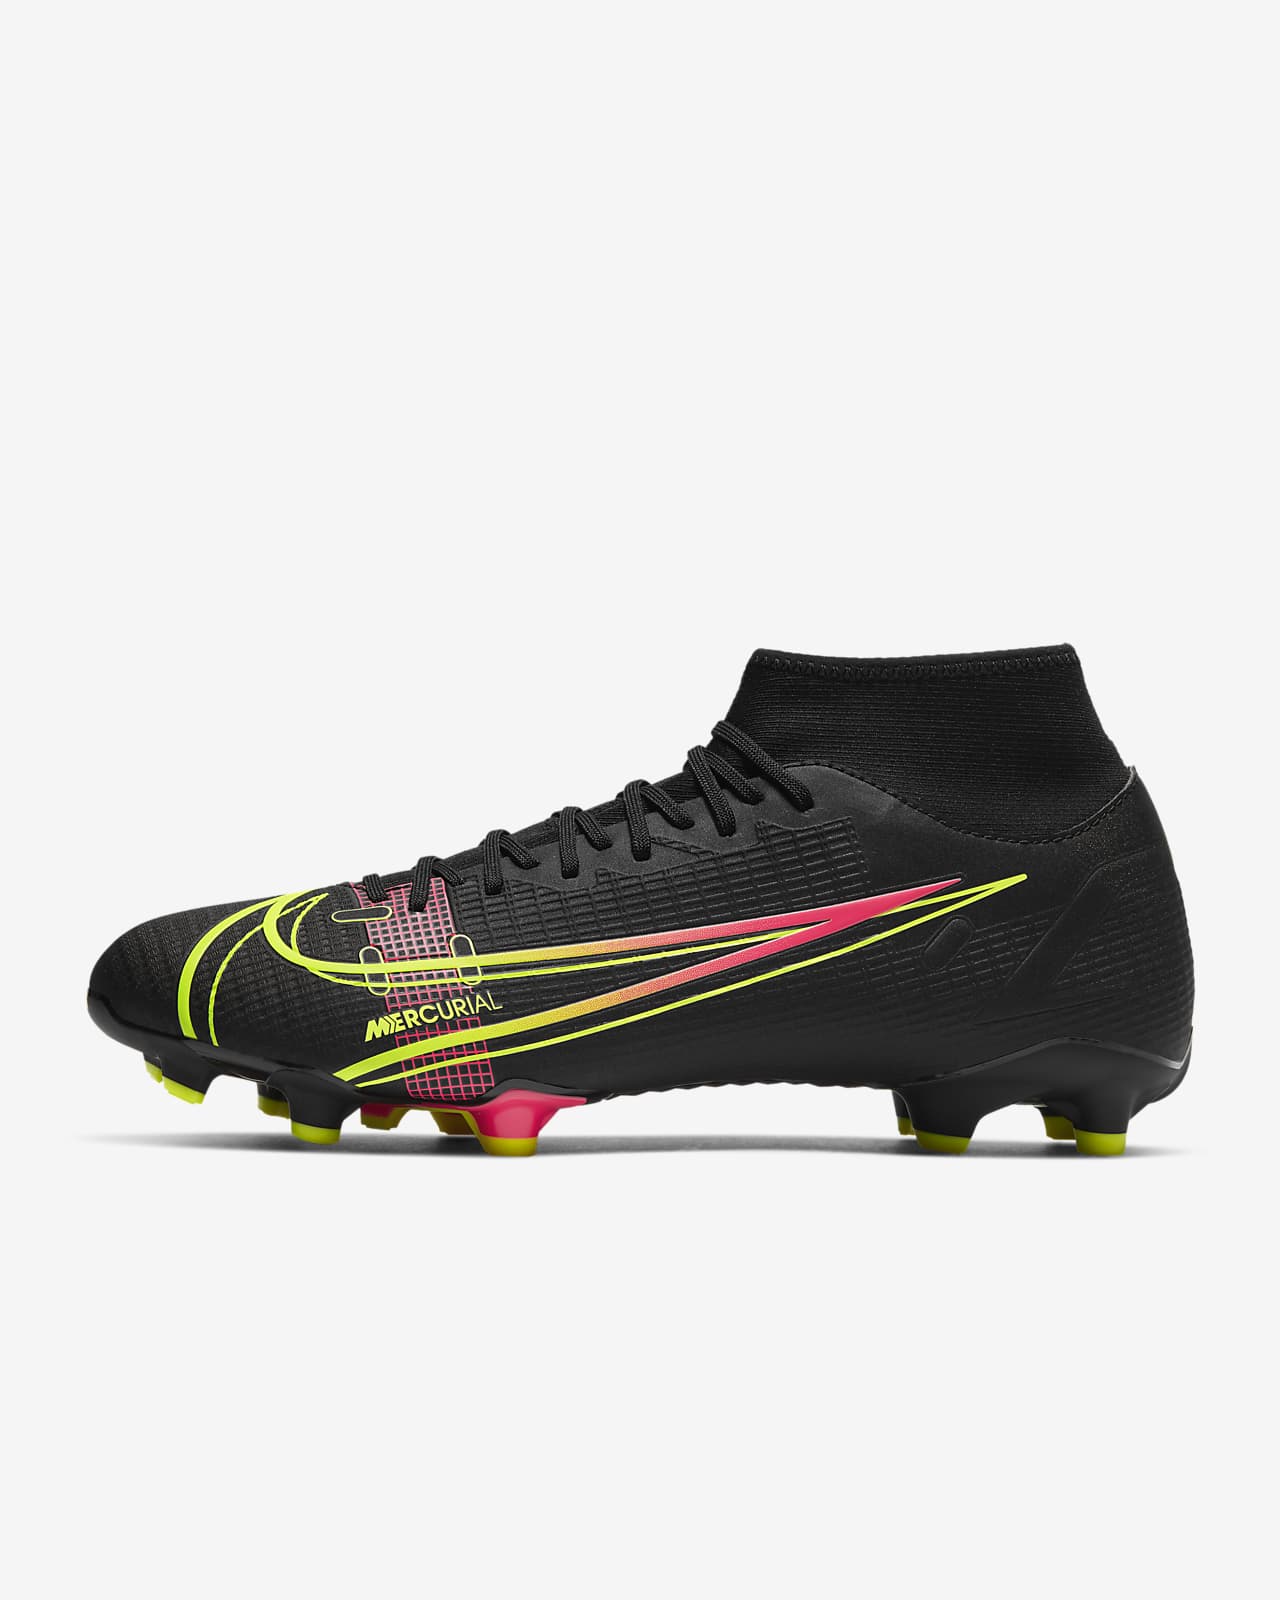 nike mercurial football boots red